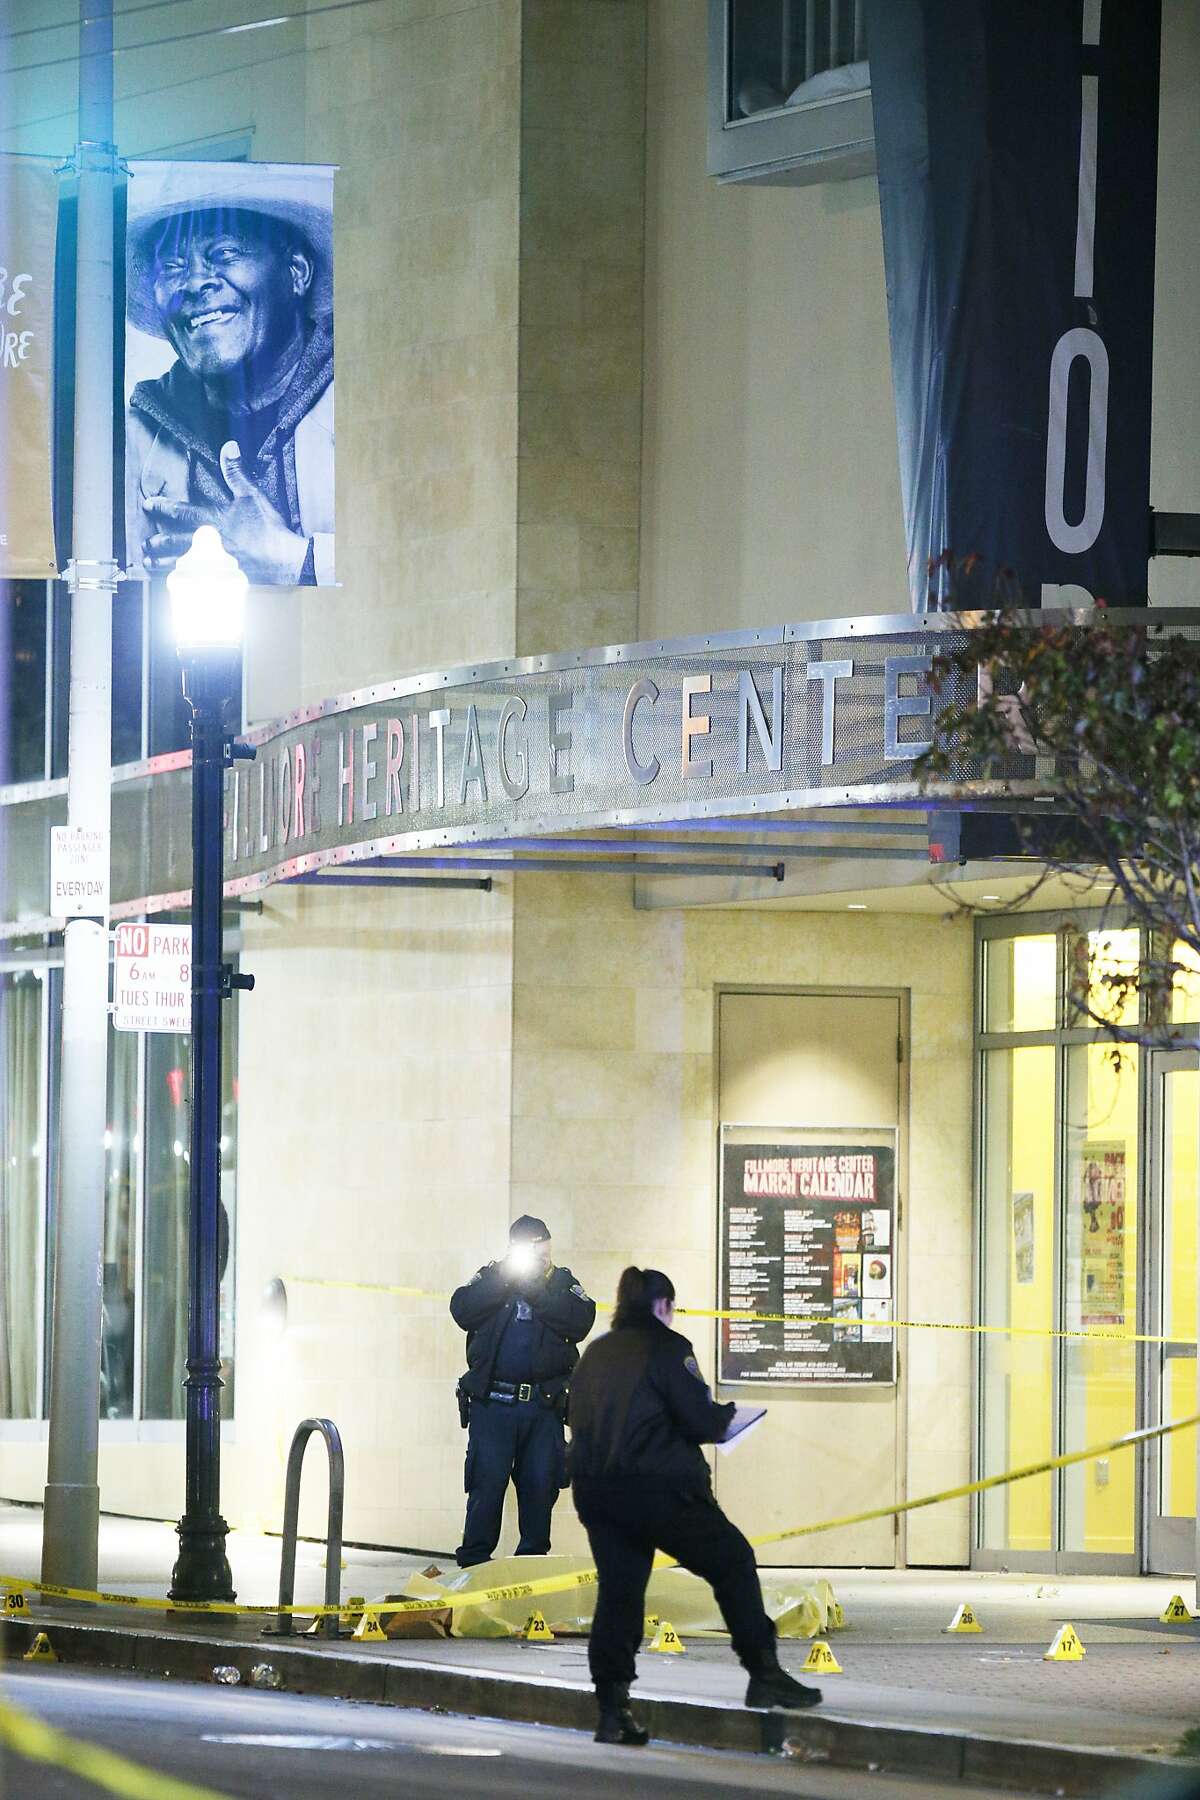 A body bag at the scene of a shooting outside the Fillmore Heritage Center as police investigate the area on Saturday, March 23, 2019, in San Francisco, Calif. Police said one is dead and several injured after a shooting.